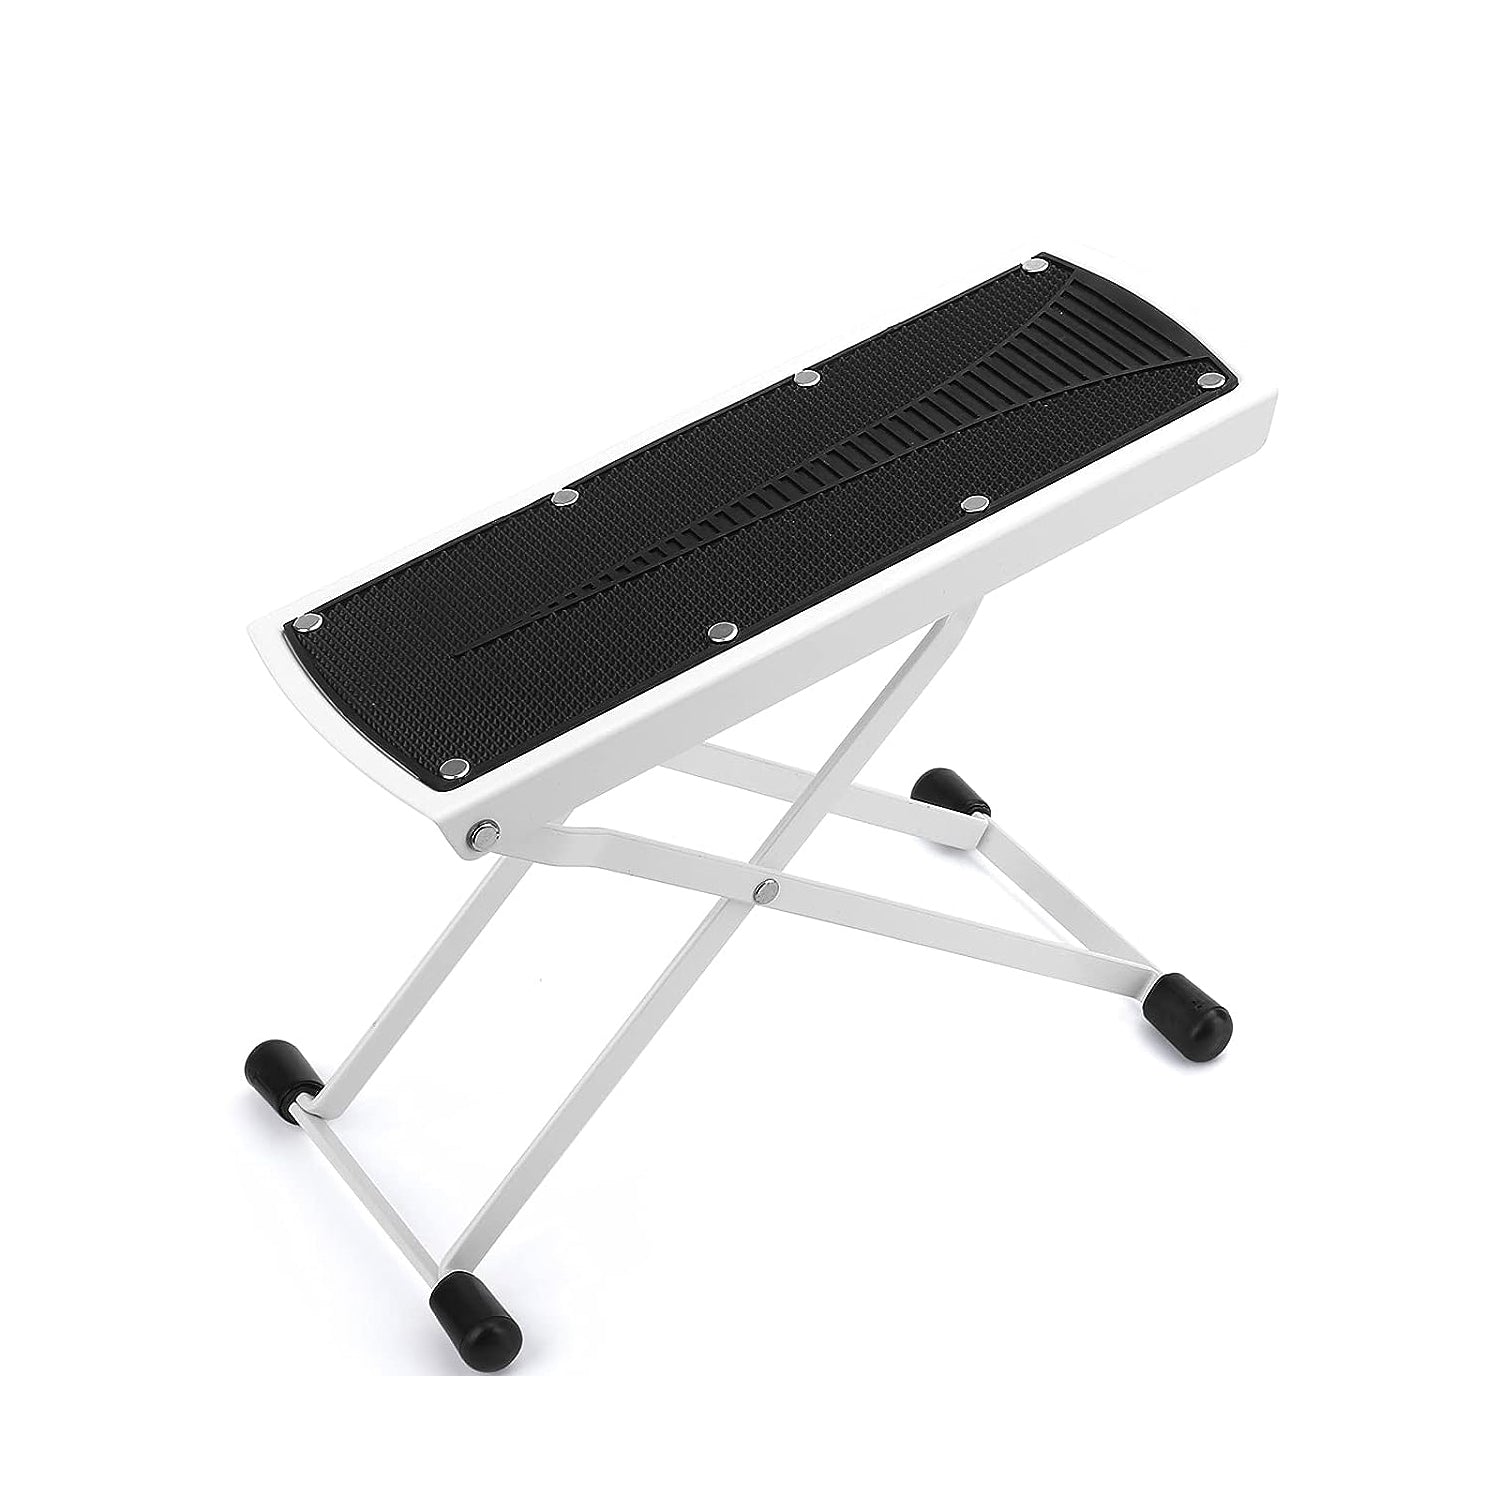 5 Core White Guitar Foot Stool Stand 6 Level Height Adjustable Leg Rest • Stable Foot Stand w Non-Slip Pad